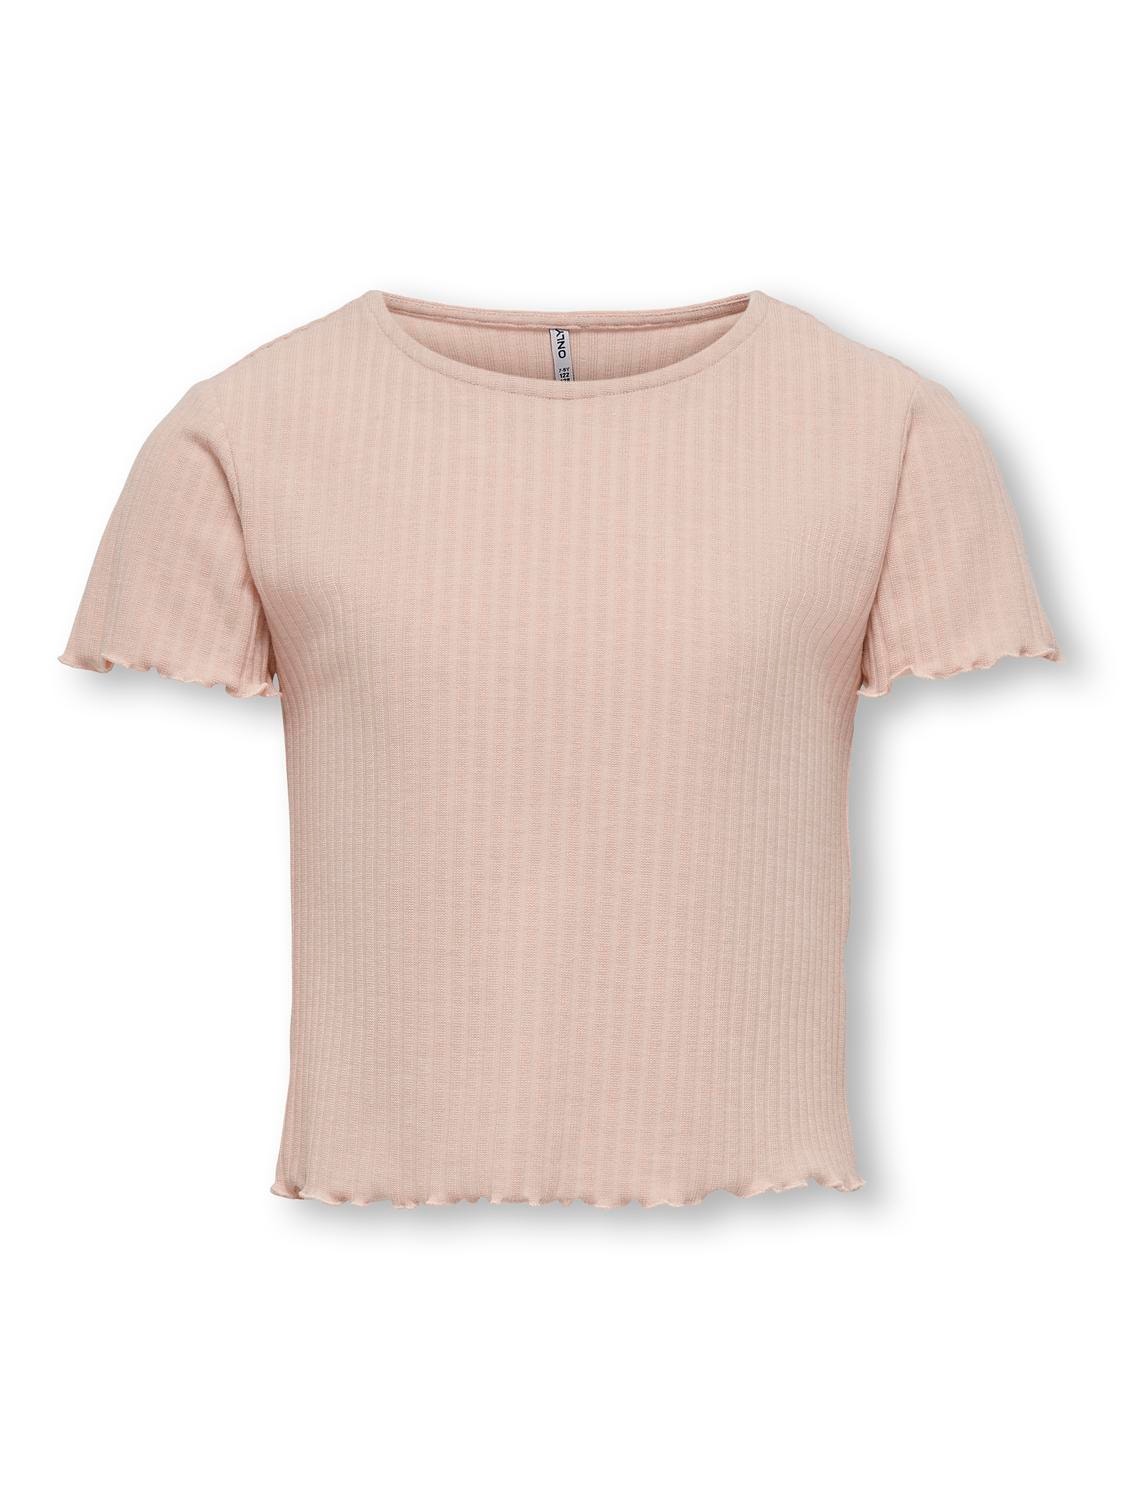 ONLY Stretch Fit Round Neck Top -Rose Smoke - 15225338